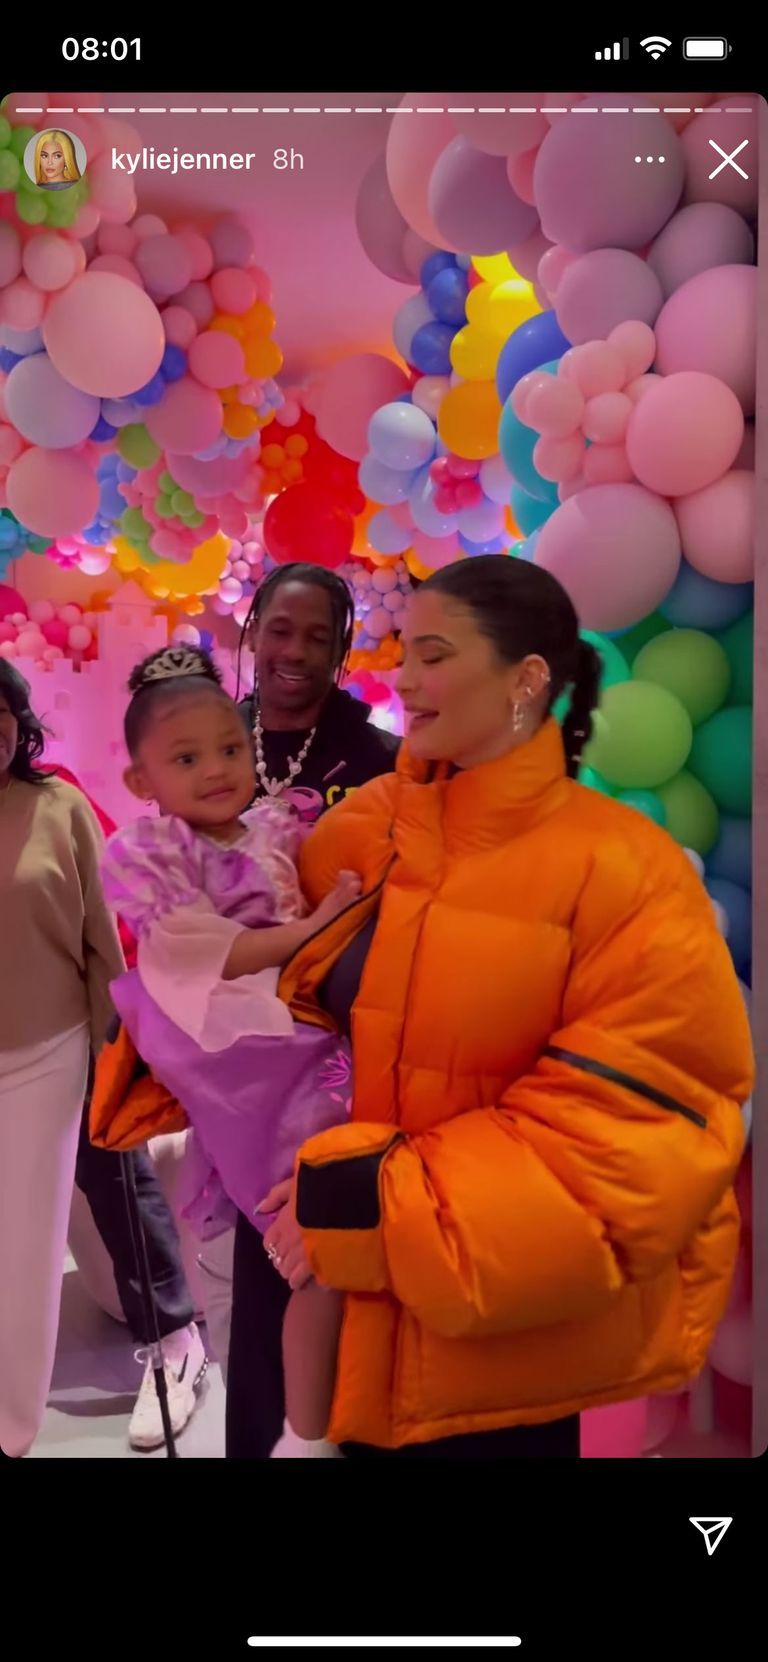 the people at stormi's third birthday party, not wearing masks